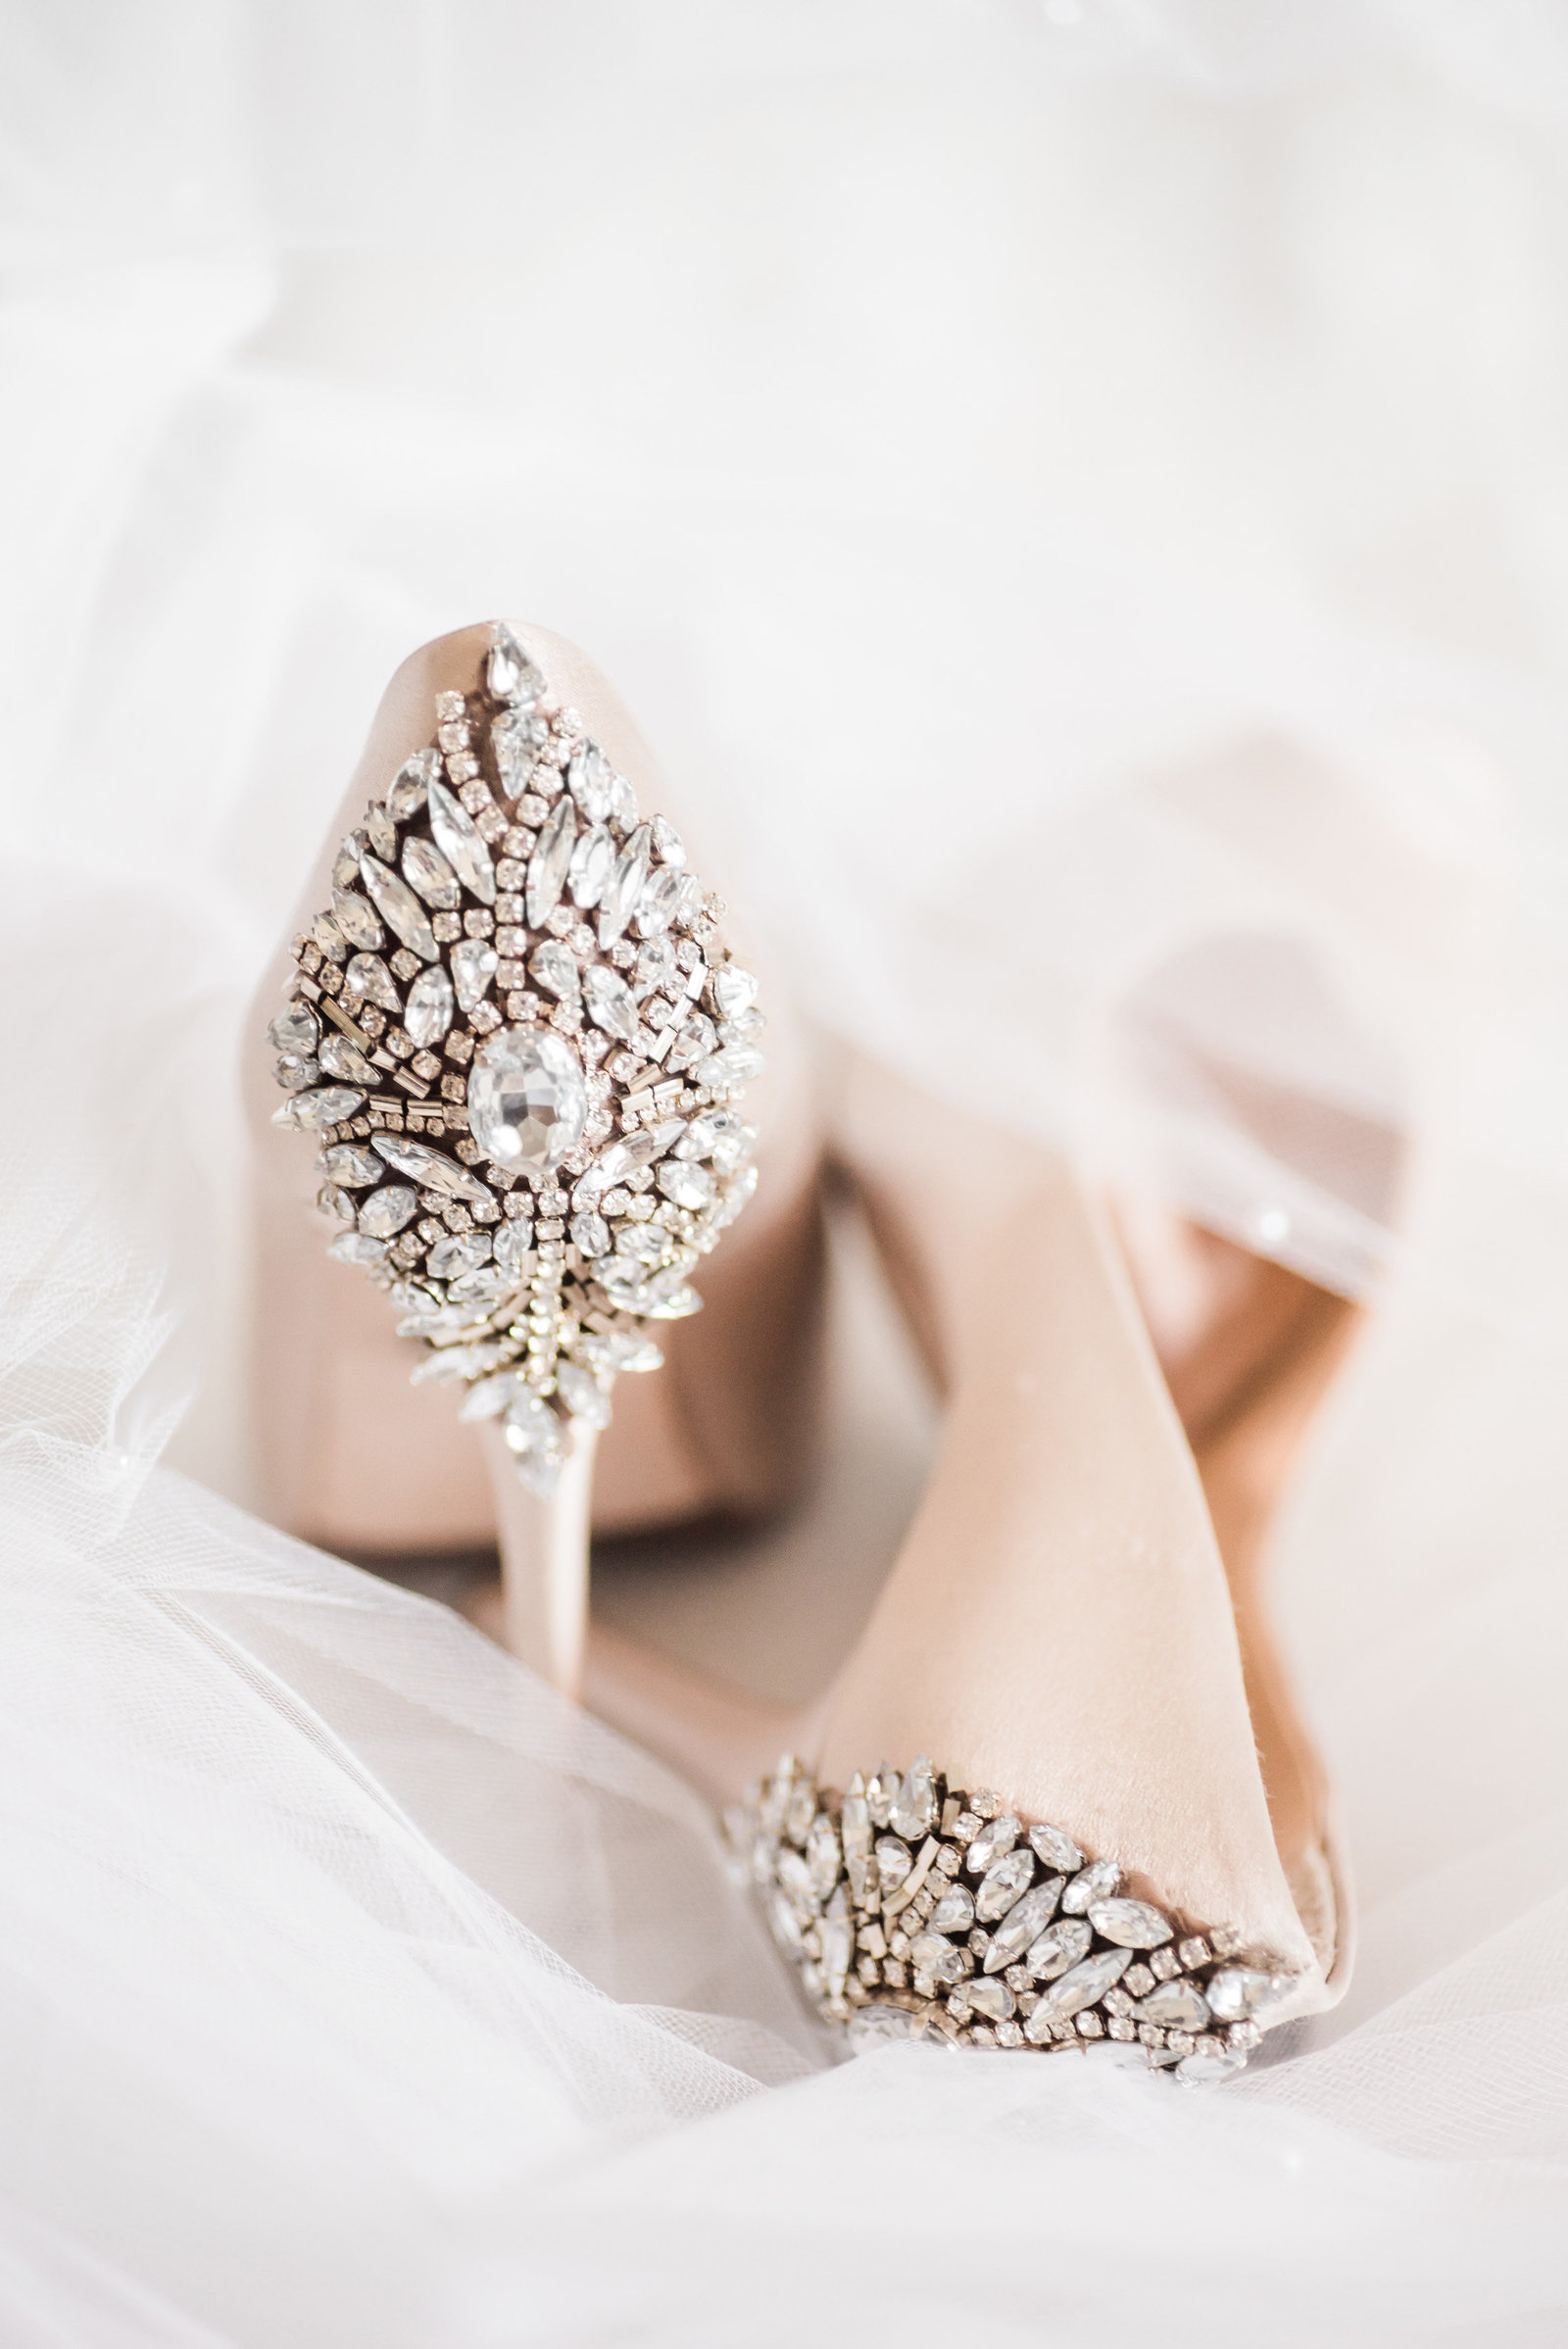 Tucson Skyline Country Club Wedding Photo of Bridal Details Badgley Mischka Blush Pink High Heel Shoes and Veil | Tucson Wedding Photographer | West End Photography